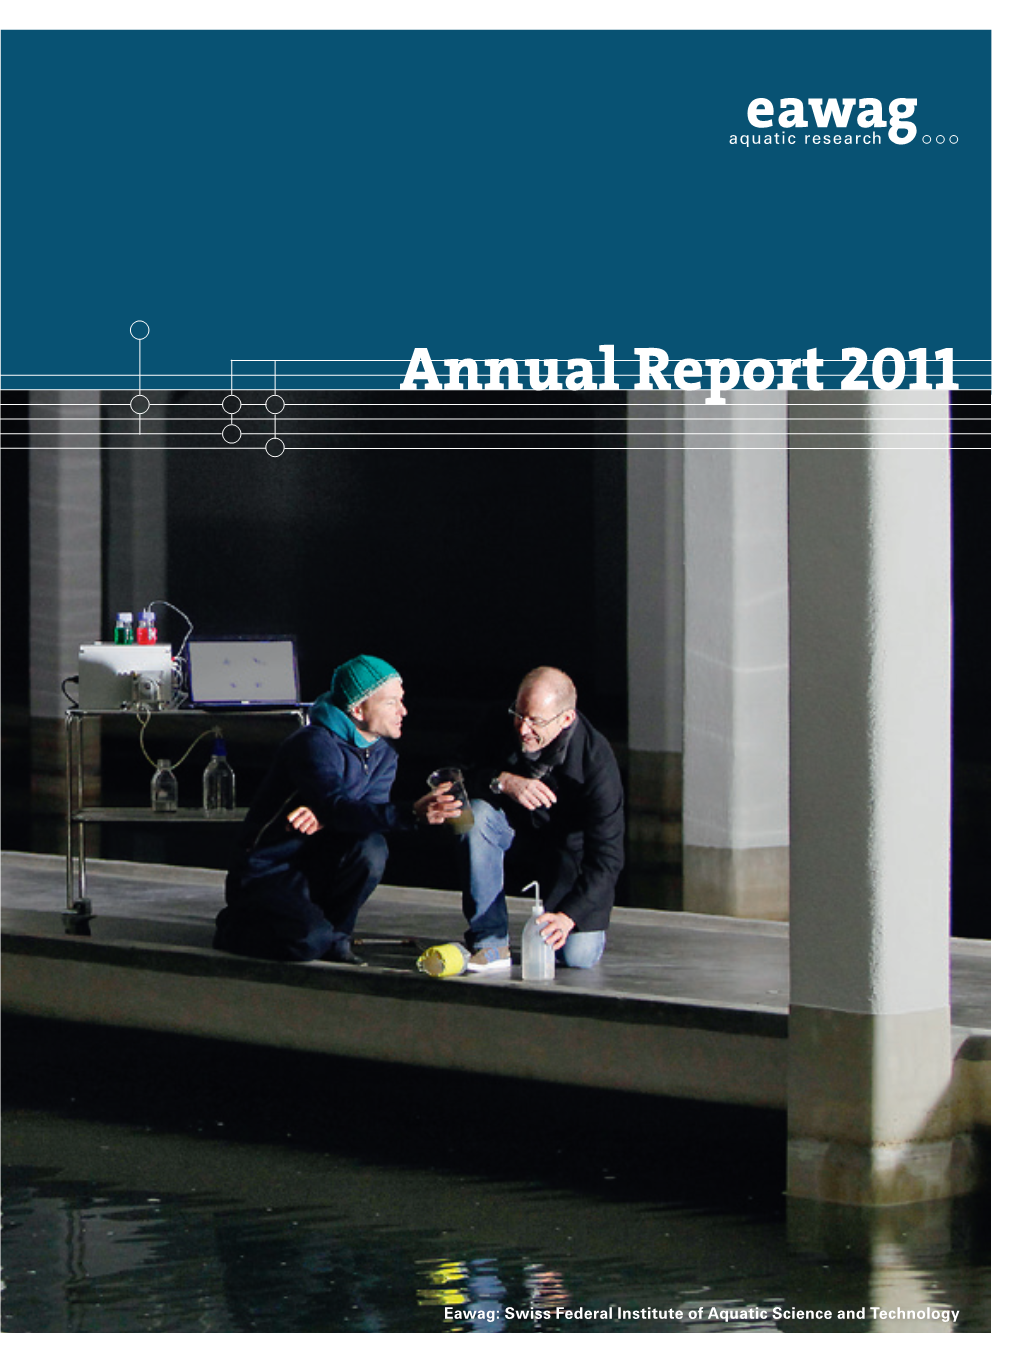 Eawag Annual Report 2011